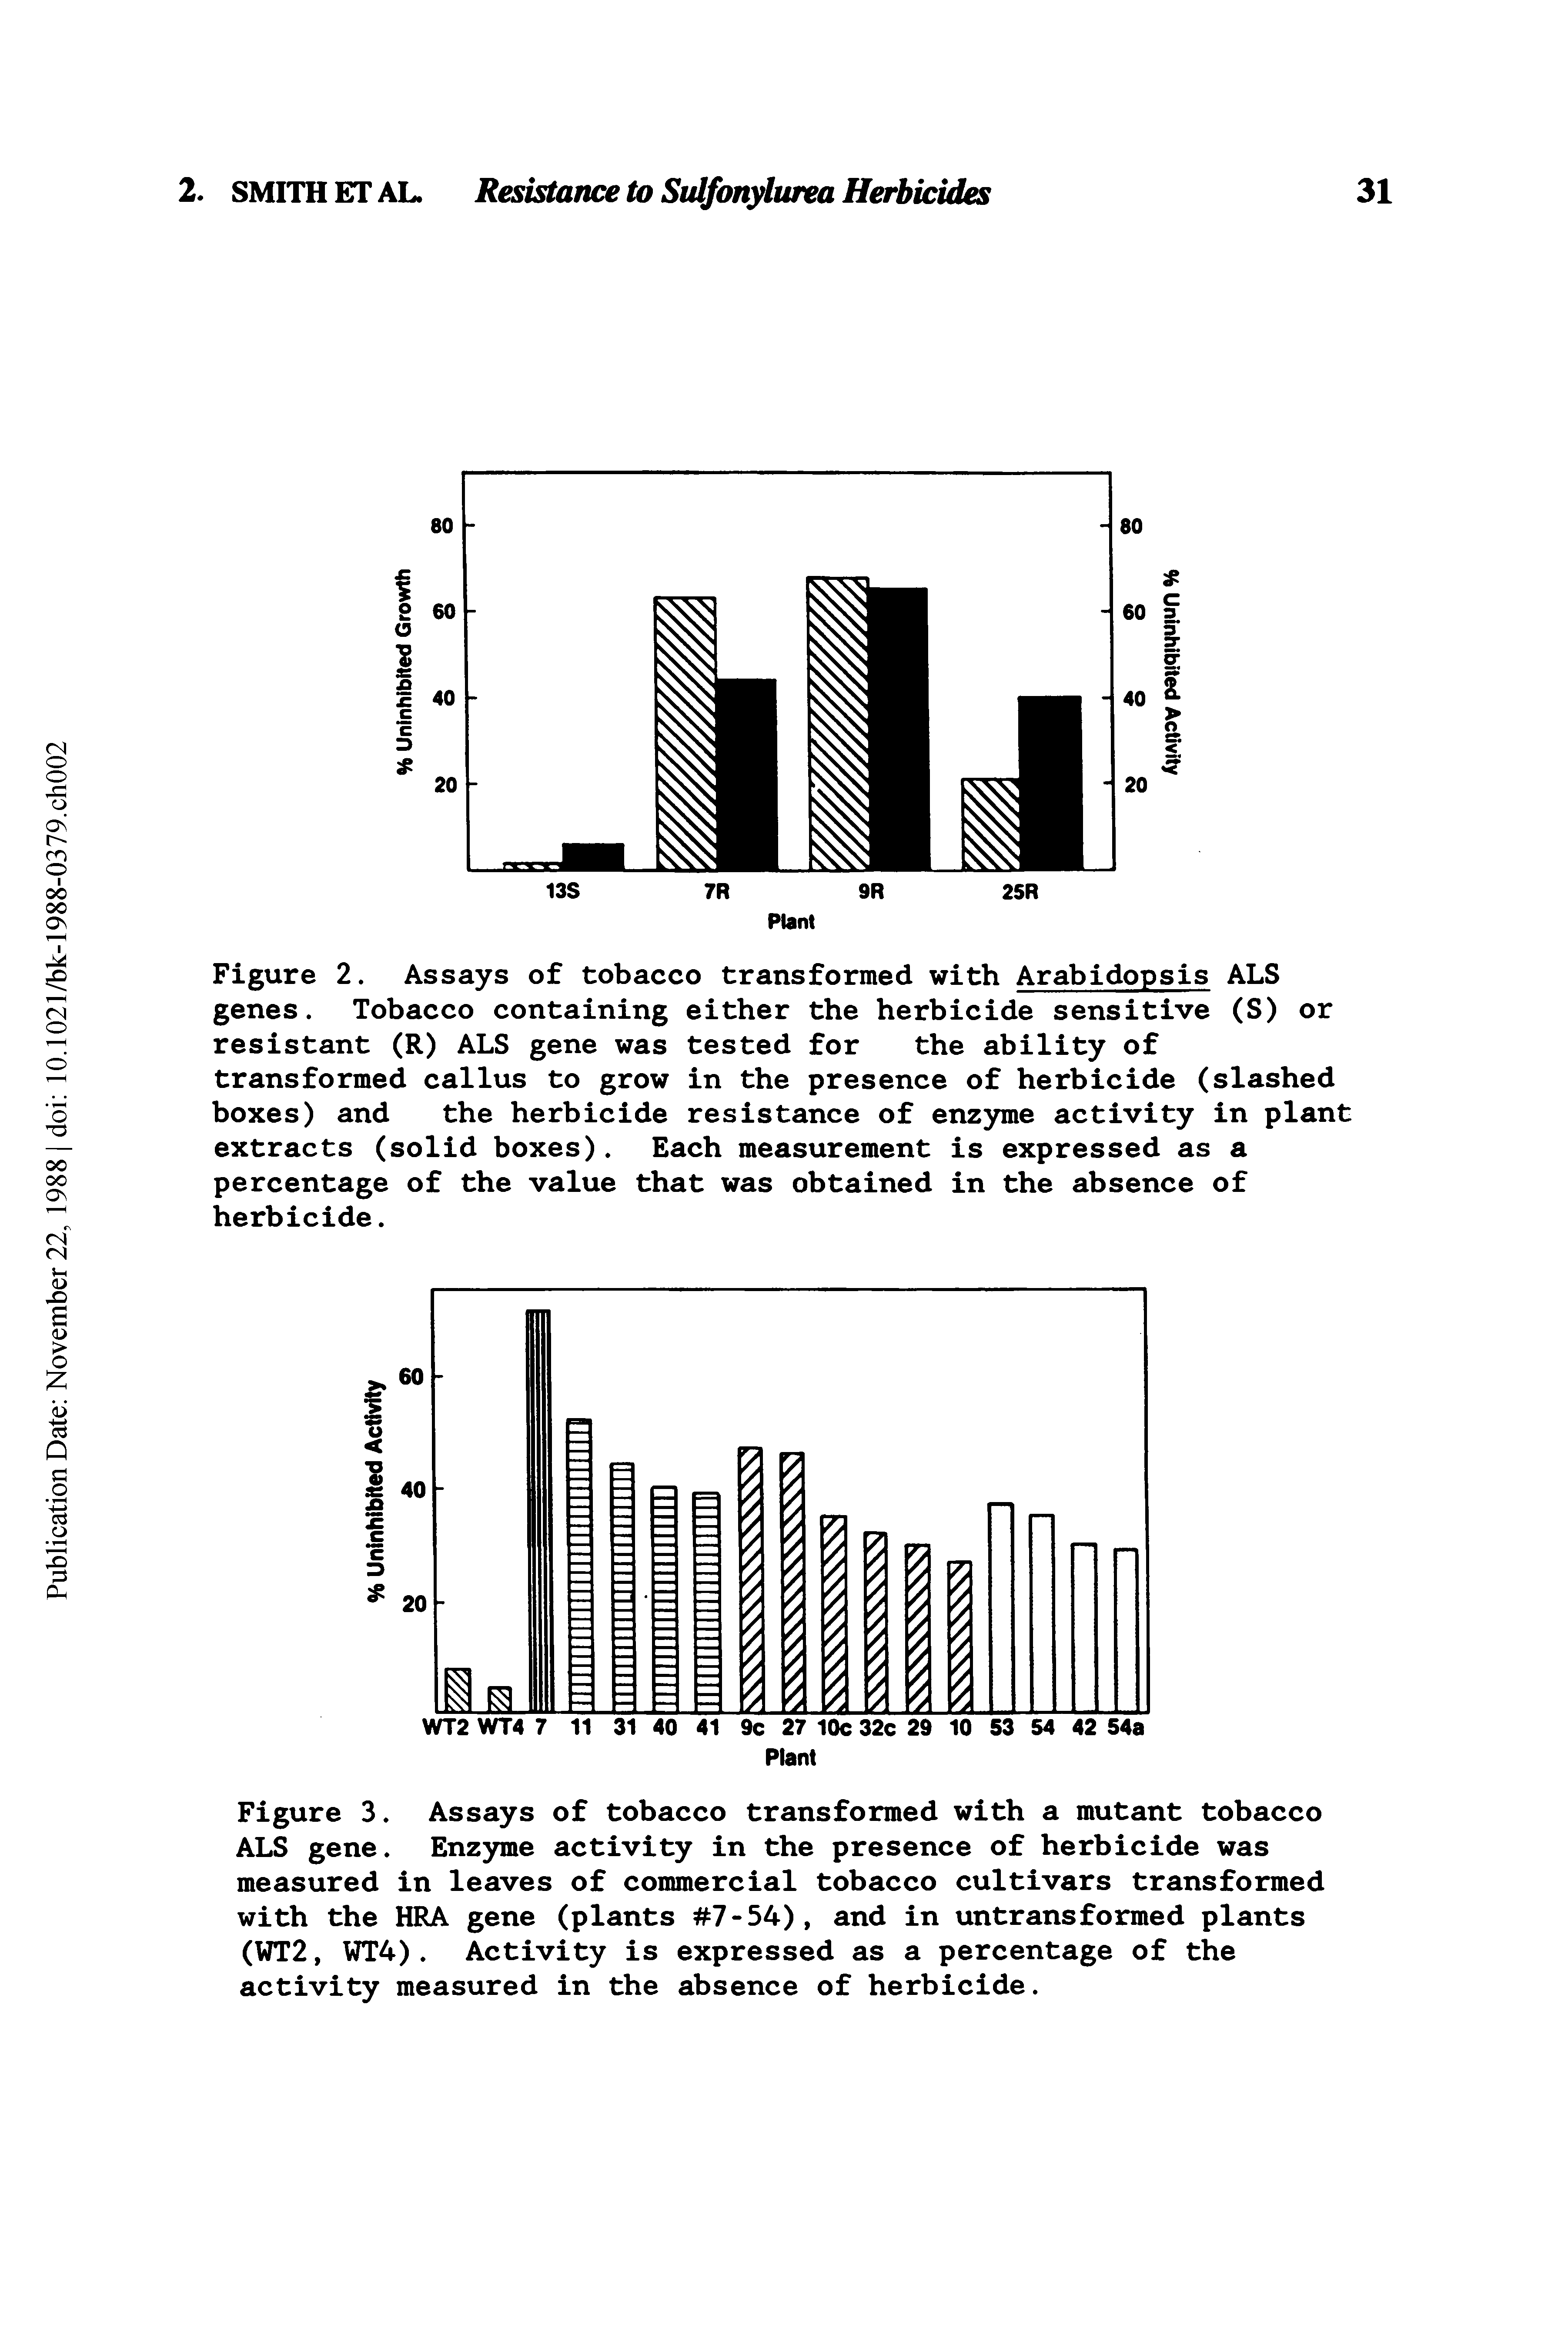 Figure 2. Assays of tobacco transformed with Arabidopsis ALS genes. Tobacco containing either the herbicide sensitive (S) or resistant (R) ALS gene was tested for the ability of transformed callus to grow in the presence of herbicide (slashed boxes) and the herbicide resistance of enzyme activity in plant extracts (solid boxes). Each measurement is expressed as a percentage of the value that was obtained in the absence of herbicide.